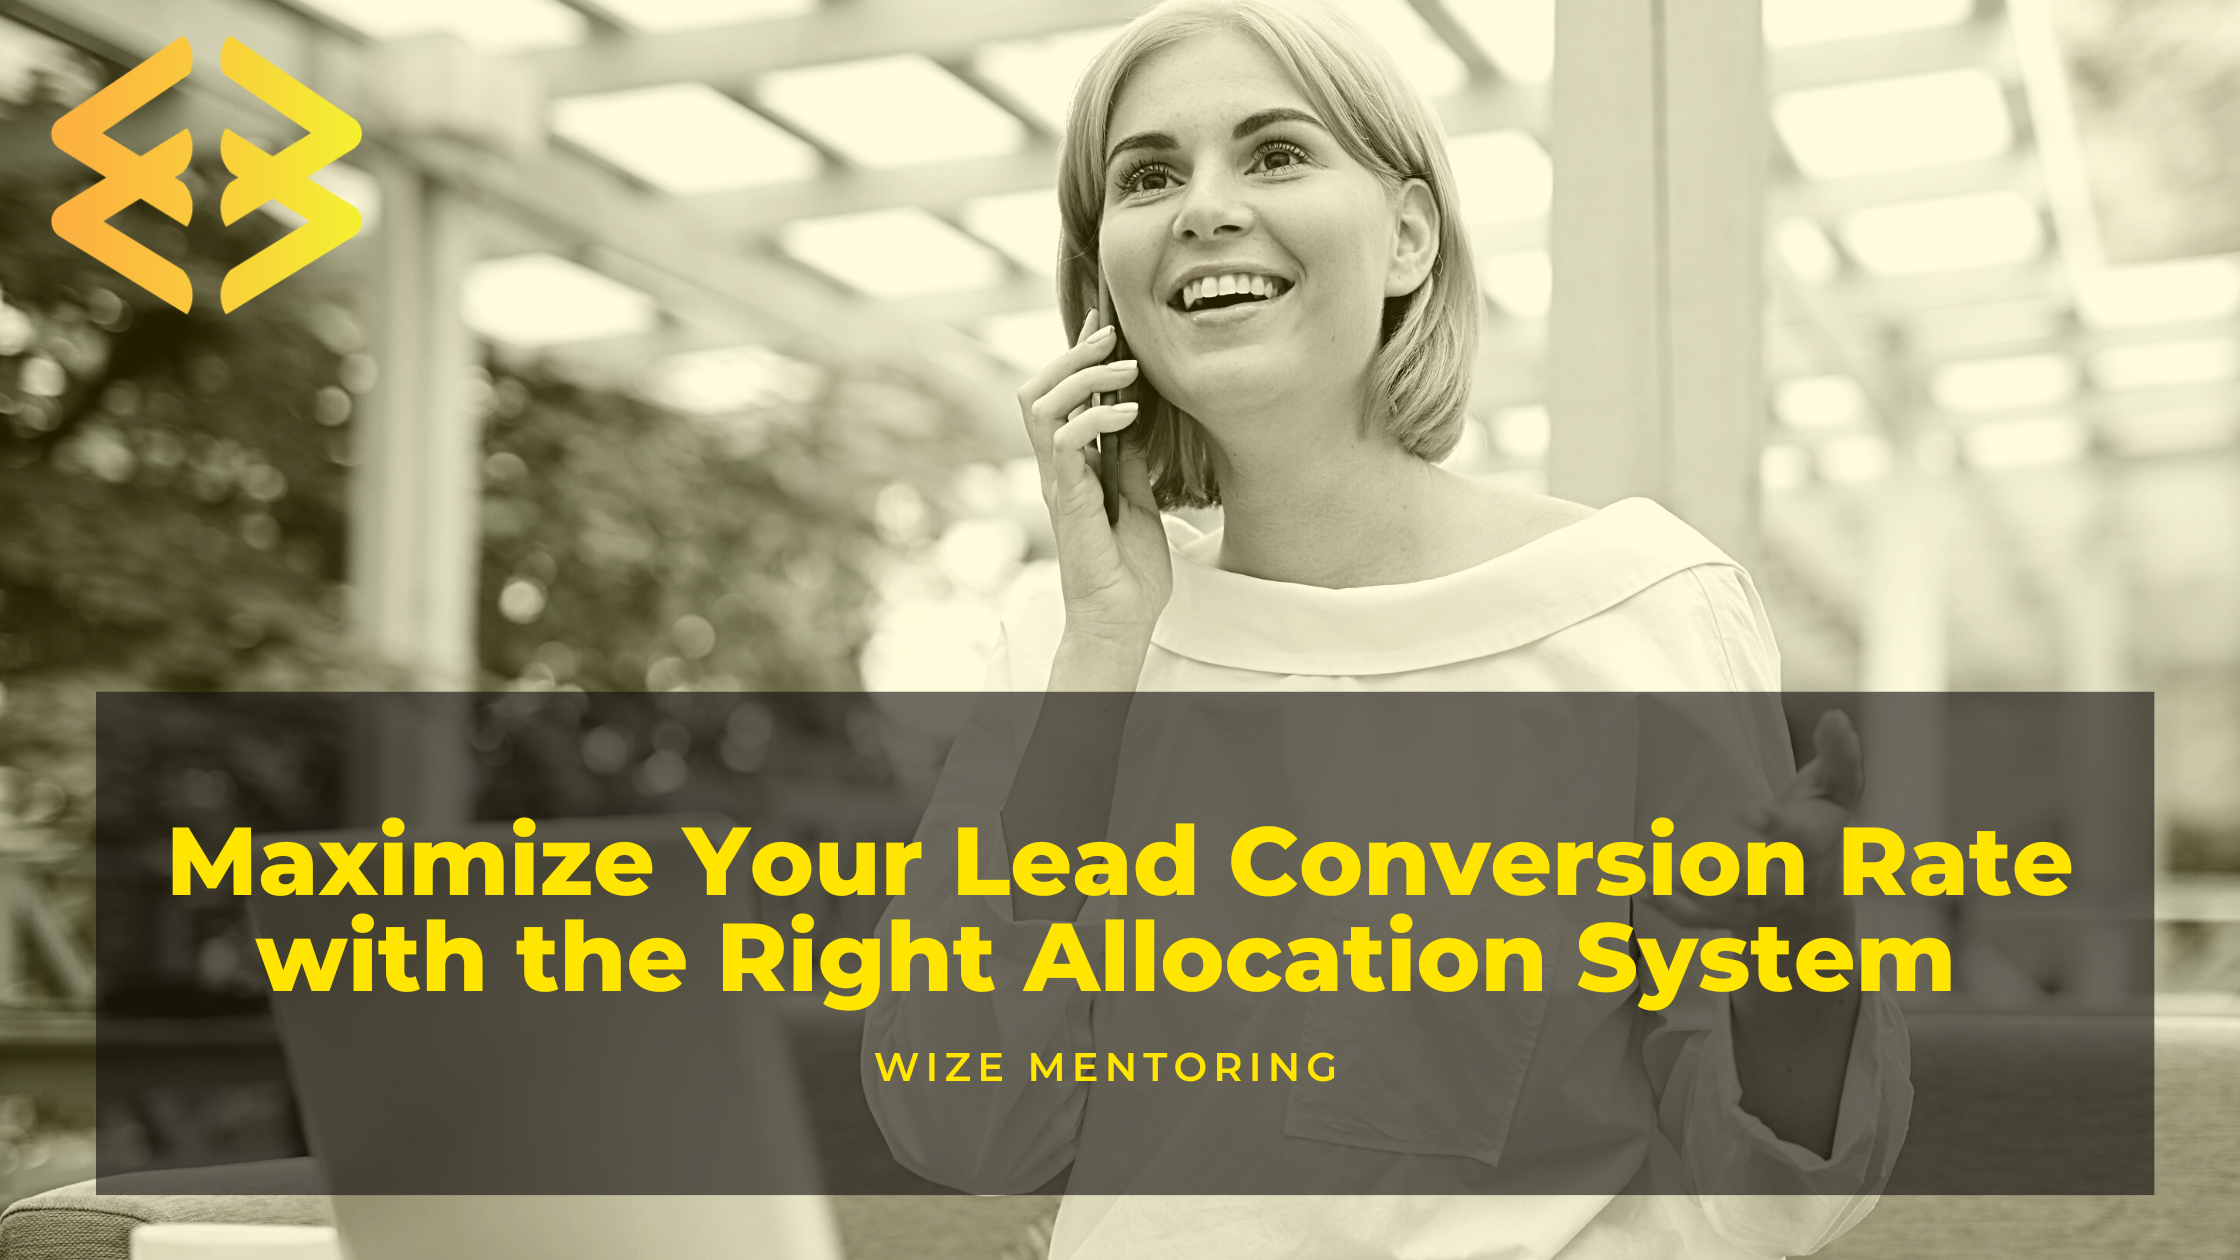 Maximize Your Lead Conversion Rate with the Right Allocation System